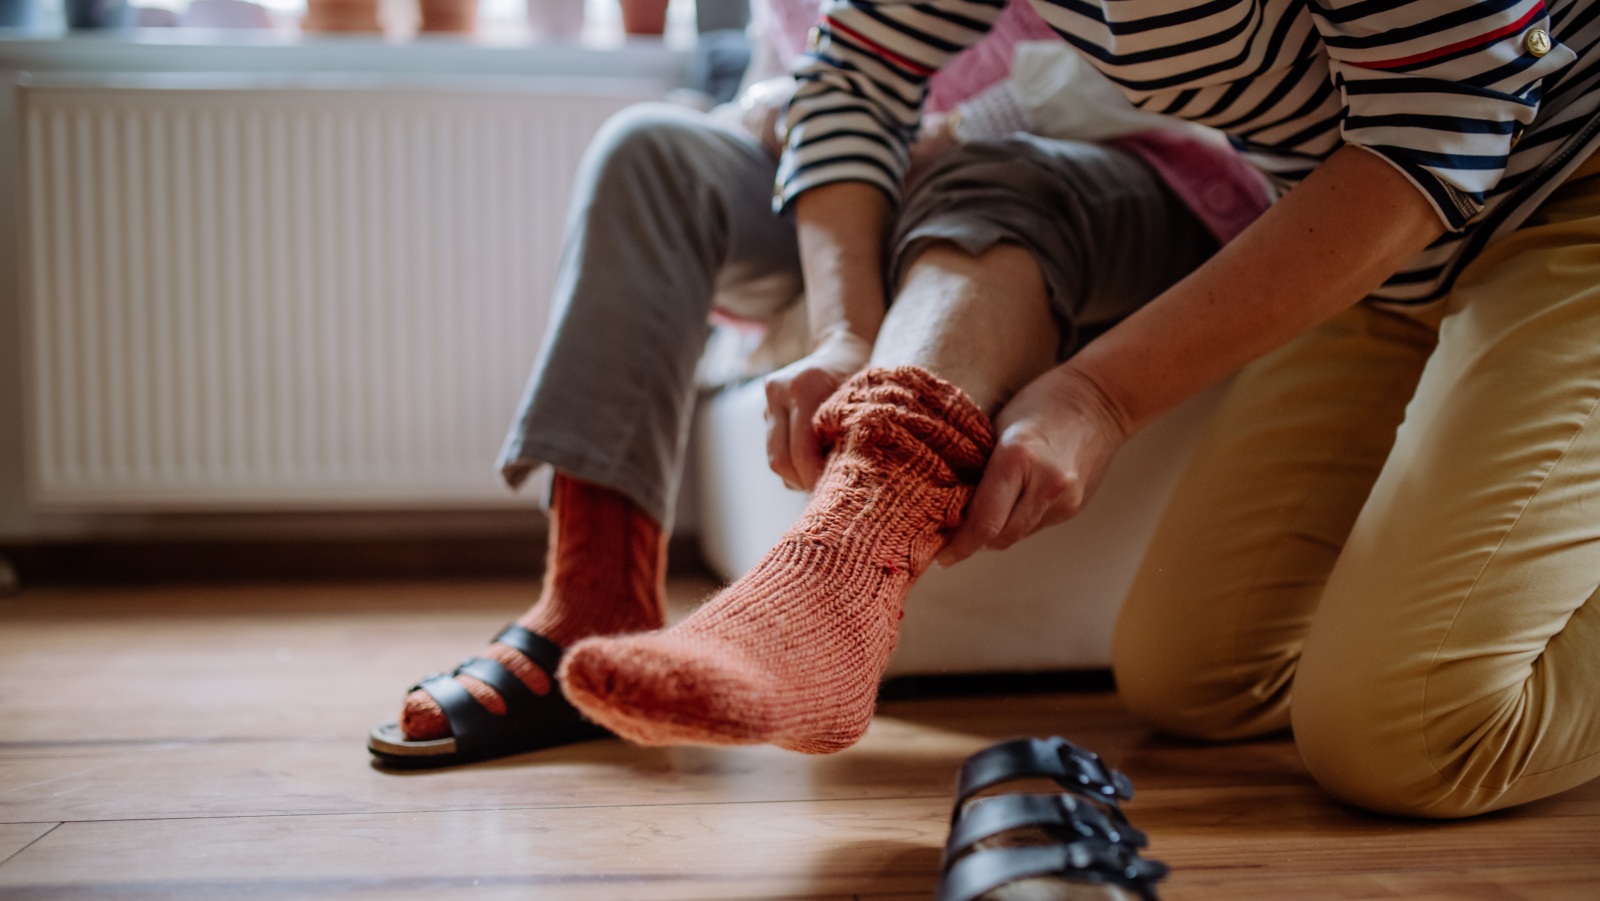 Caregiver helps man put on socks. (Photo: Getty Images)